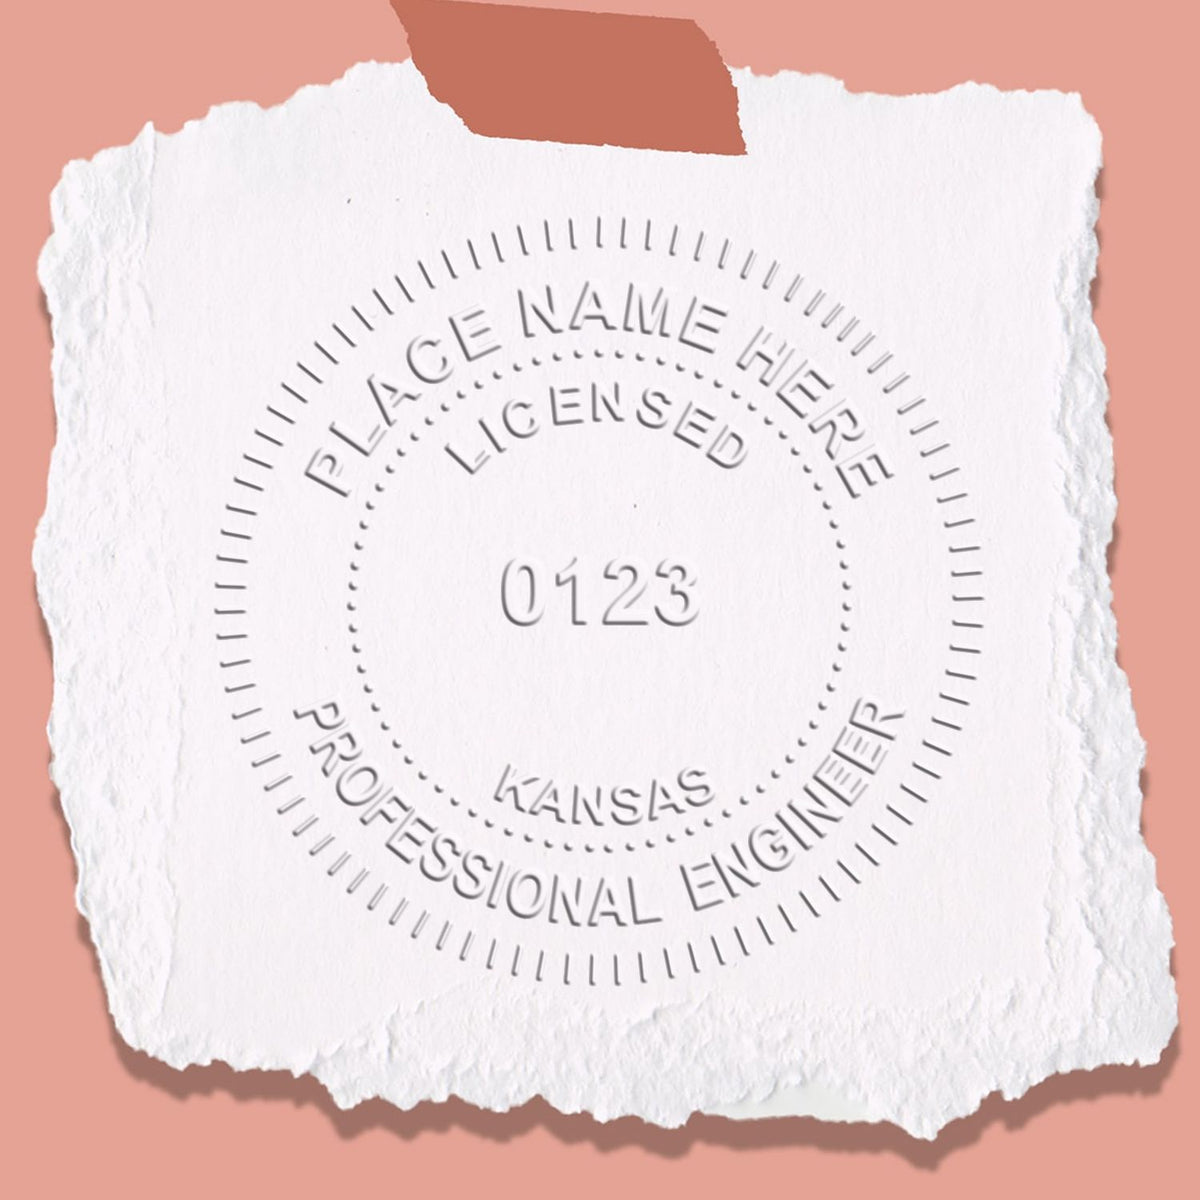 A photograph of the Hybrid Kansas Engineer Seal stamp impression reveals a vivid, professional image of the on paper.